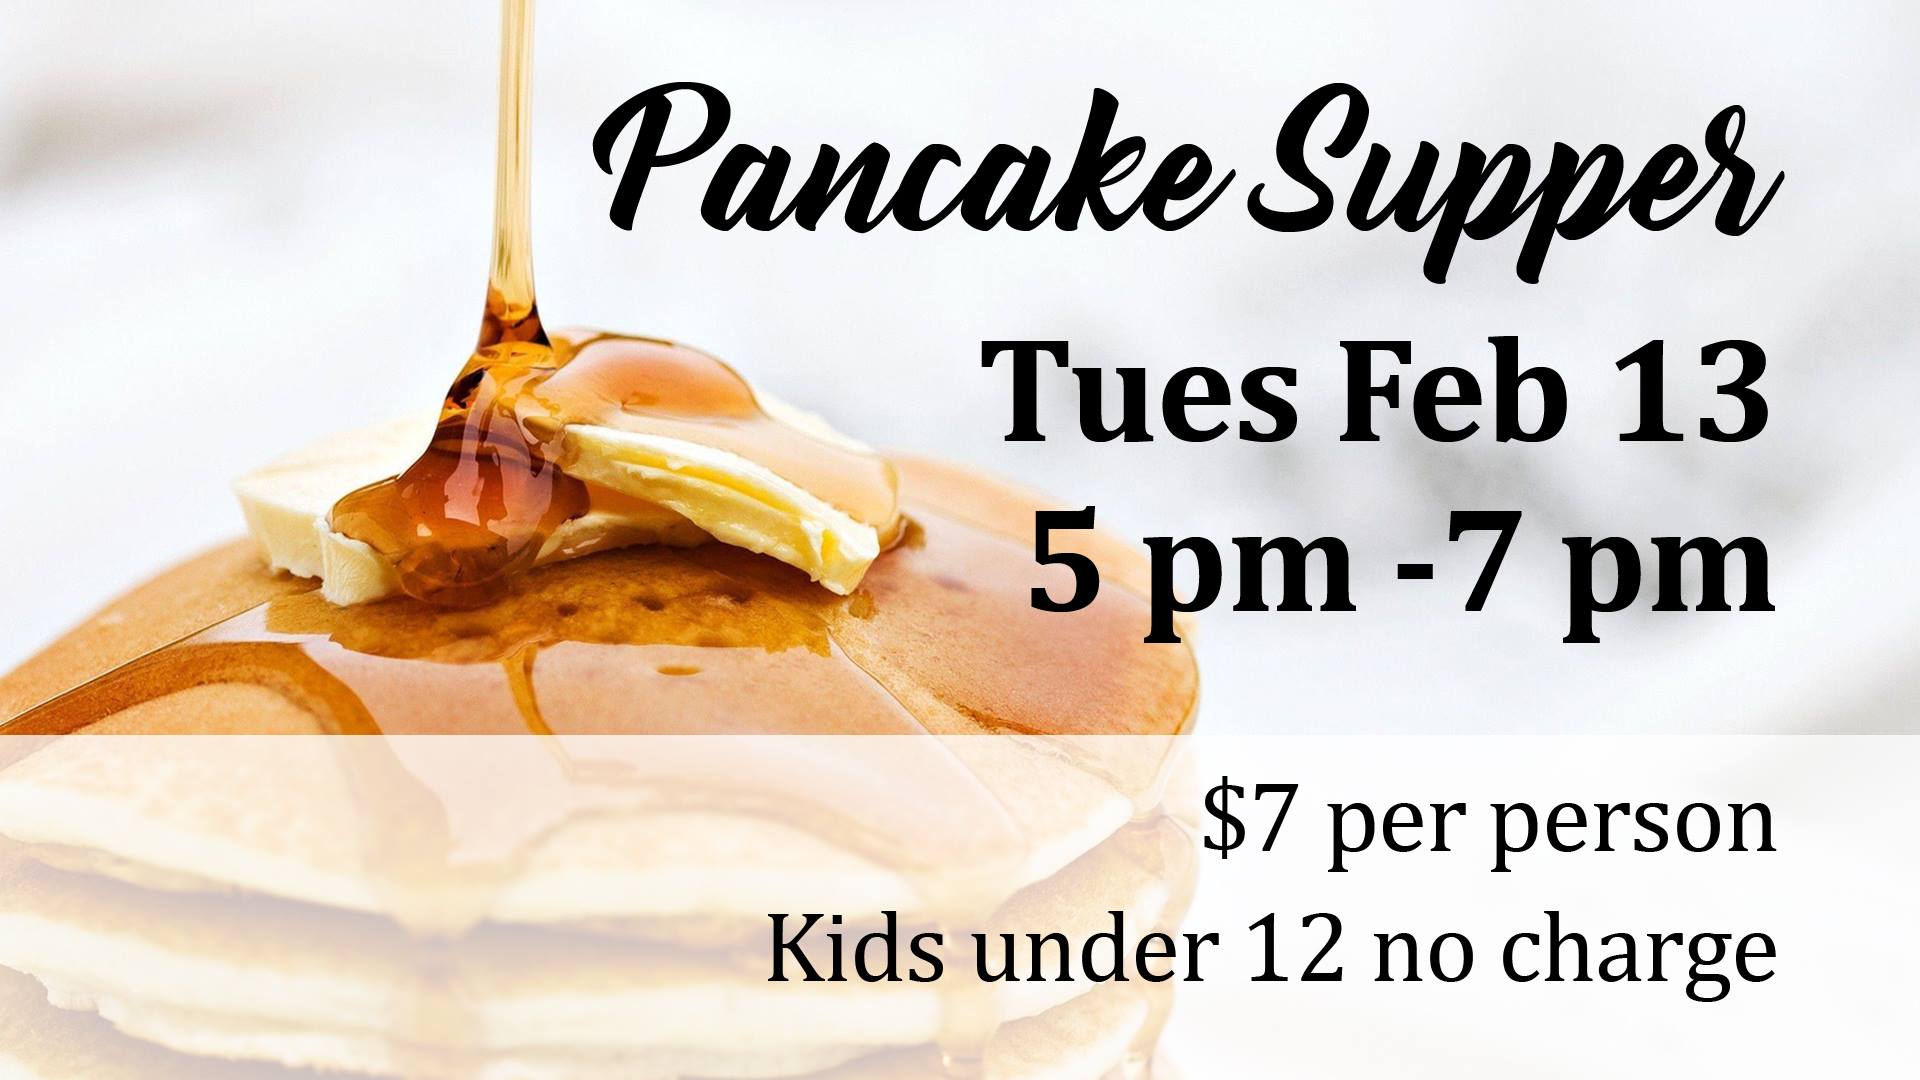 It’s the Shrove Tuesday Pancake Supper!!! Tuesday 13th February